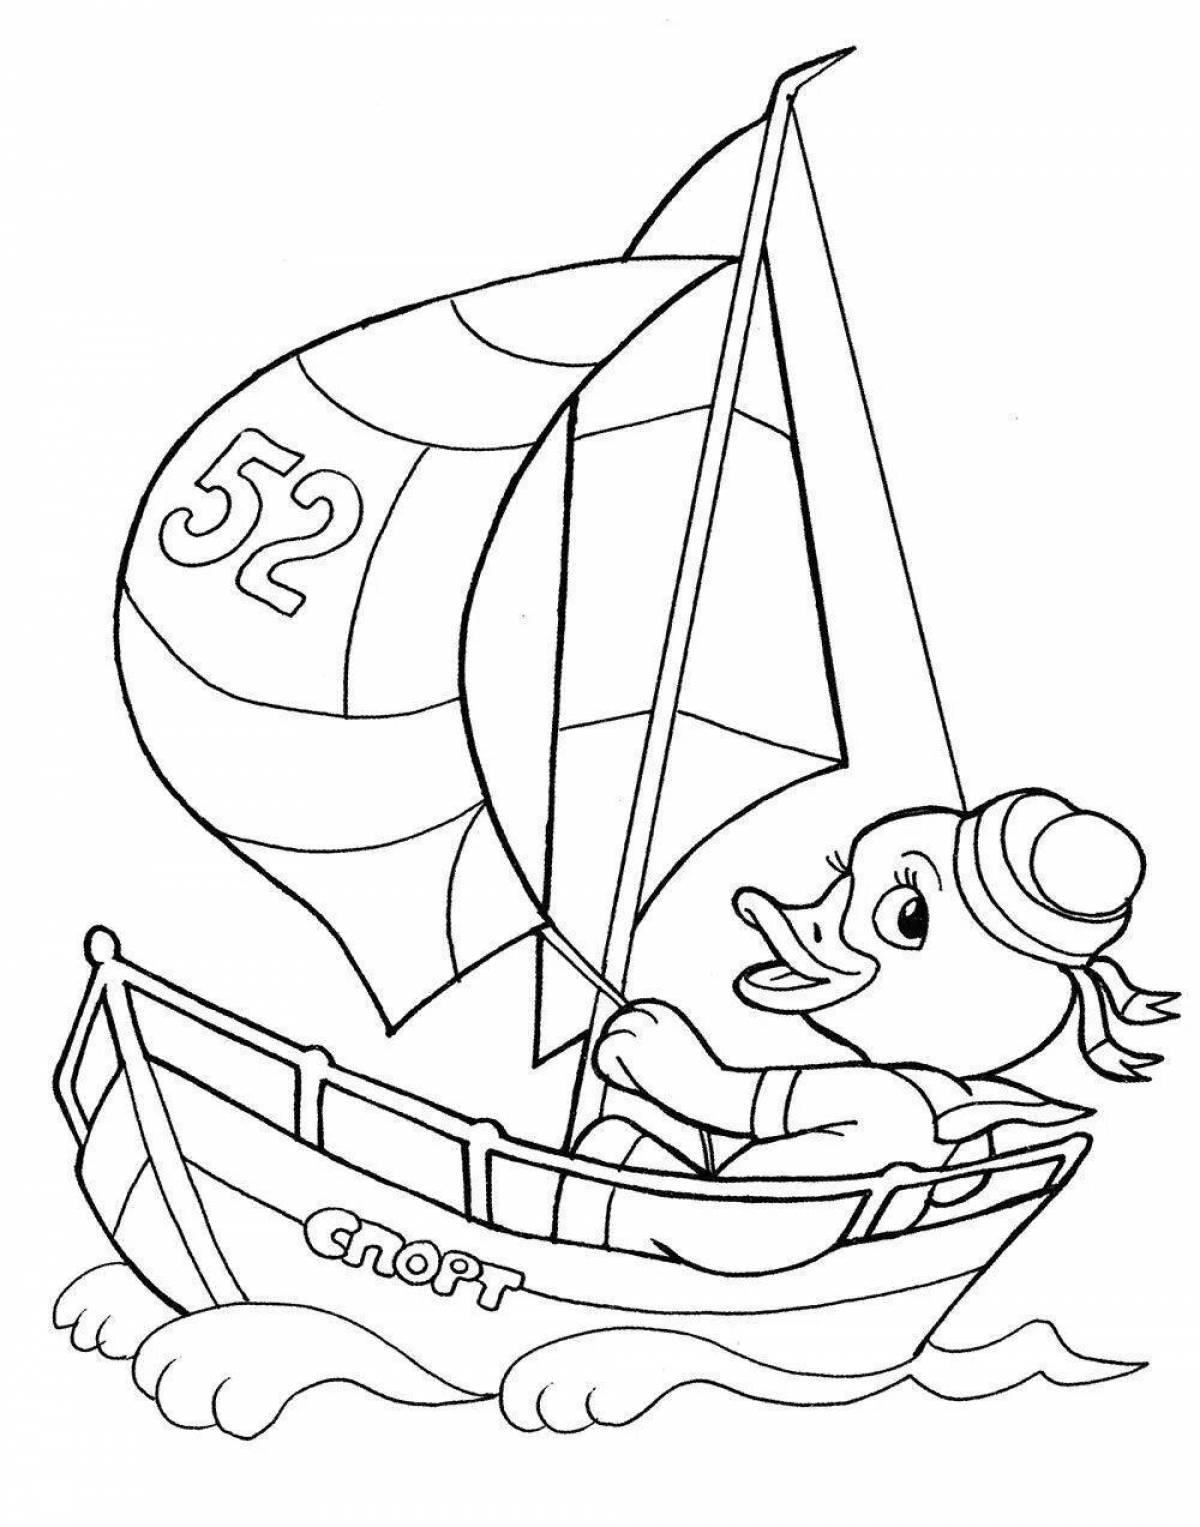 Color-brilliant coloring page for boys 6 years old